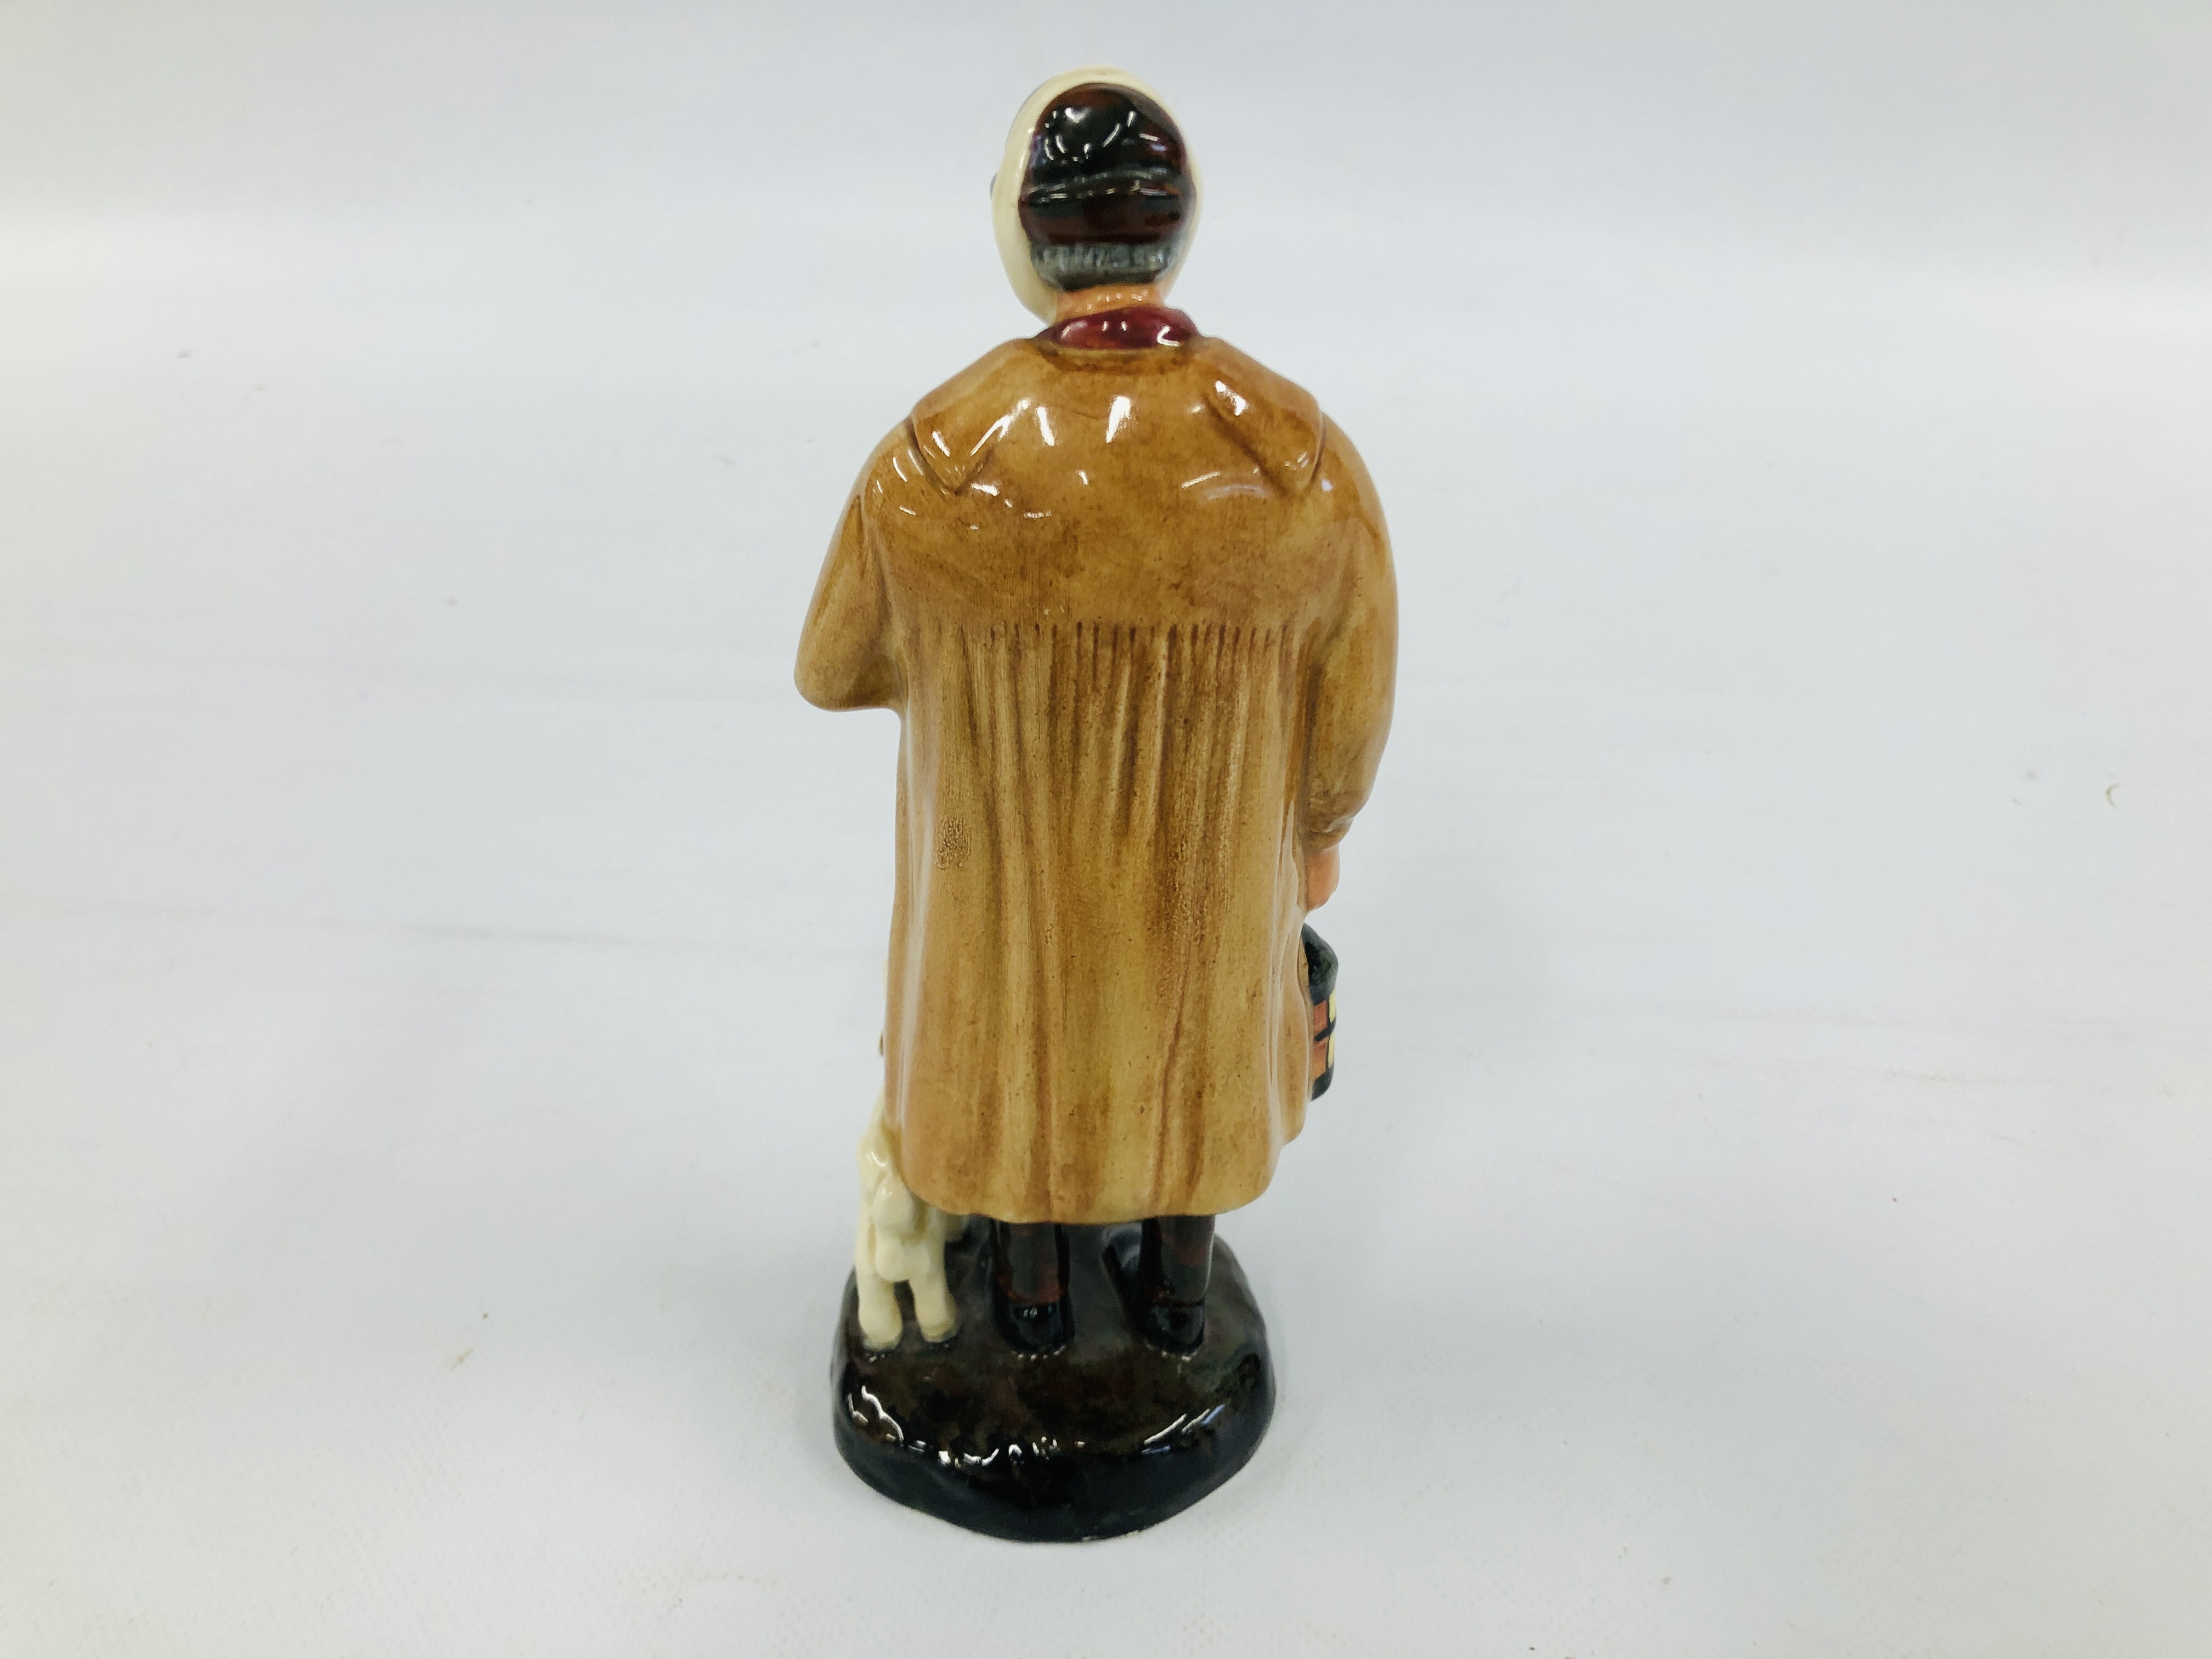 ROYAL DOULTON FIGURE OF "THE SHEPHERD" H.N. 1975 R NO. 842485 22CM H. - Image 5 of 7